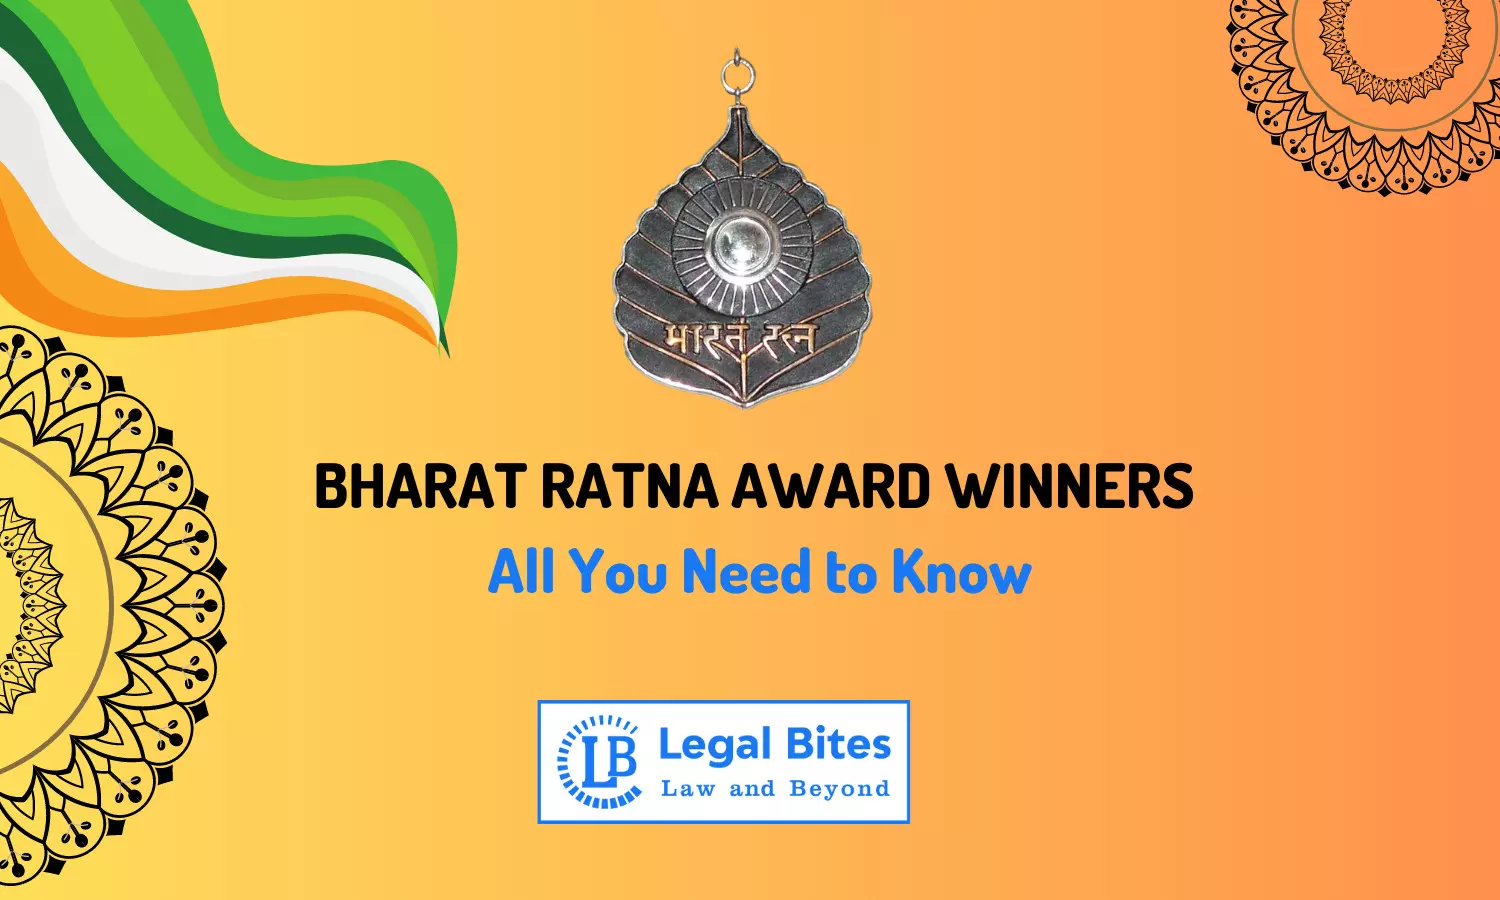 Bharat Ratna Award Winners - All You Need to Know